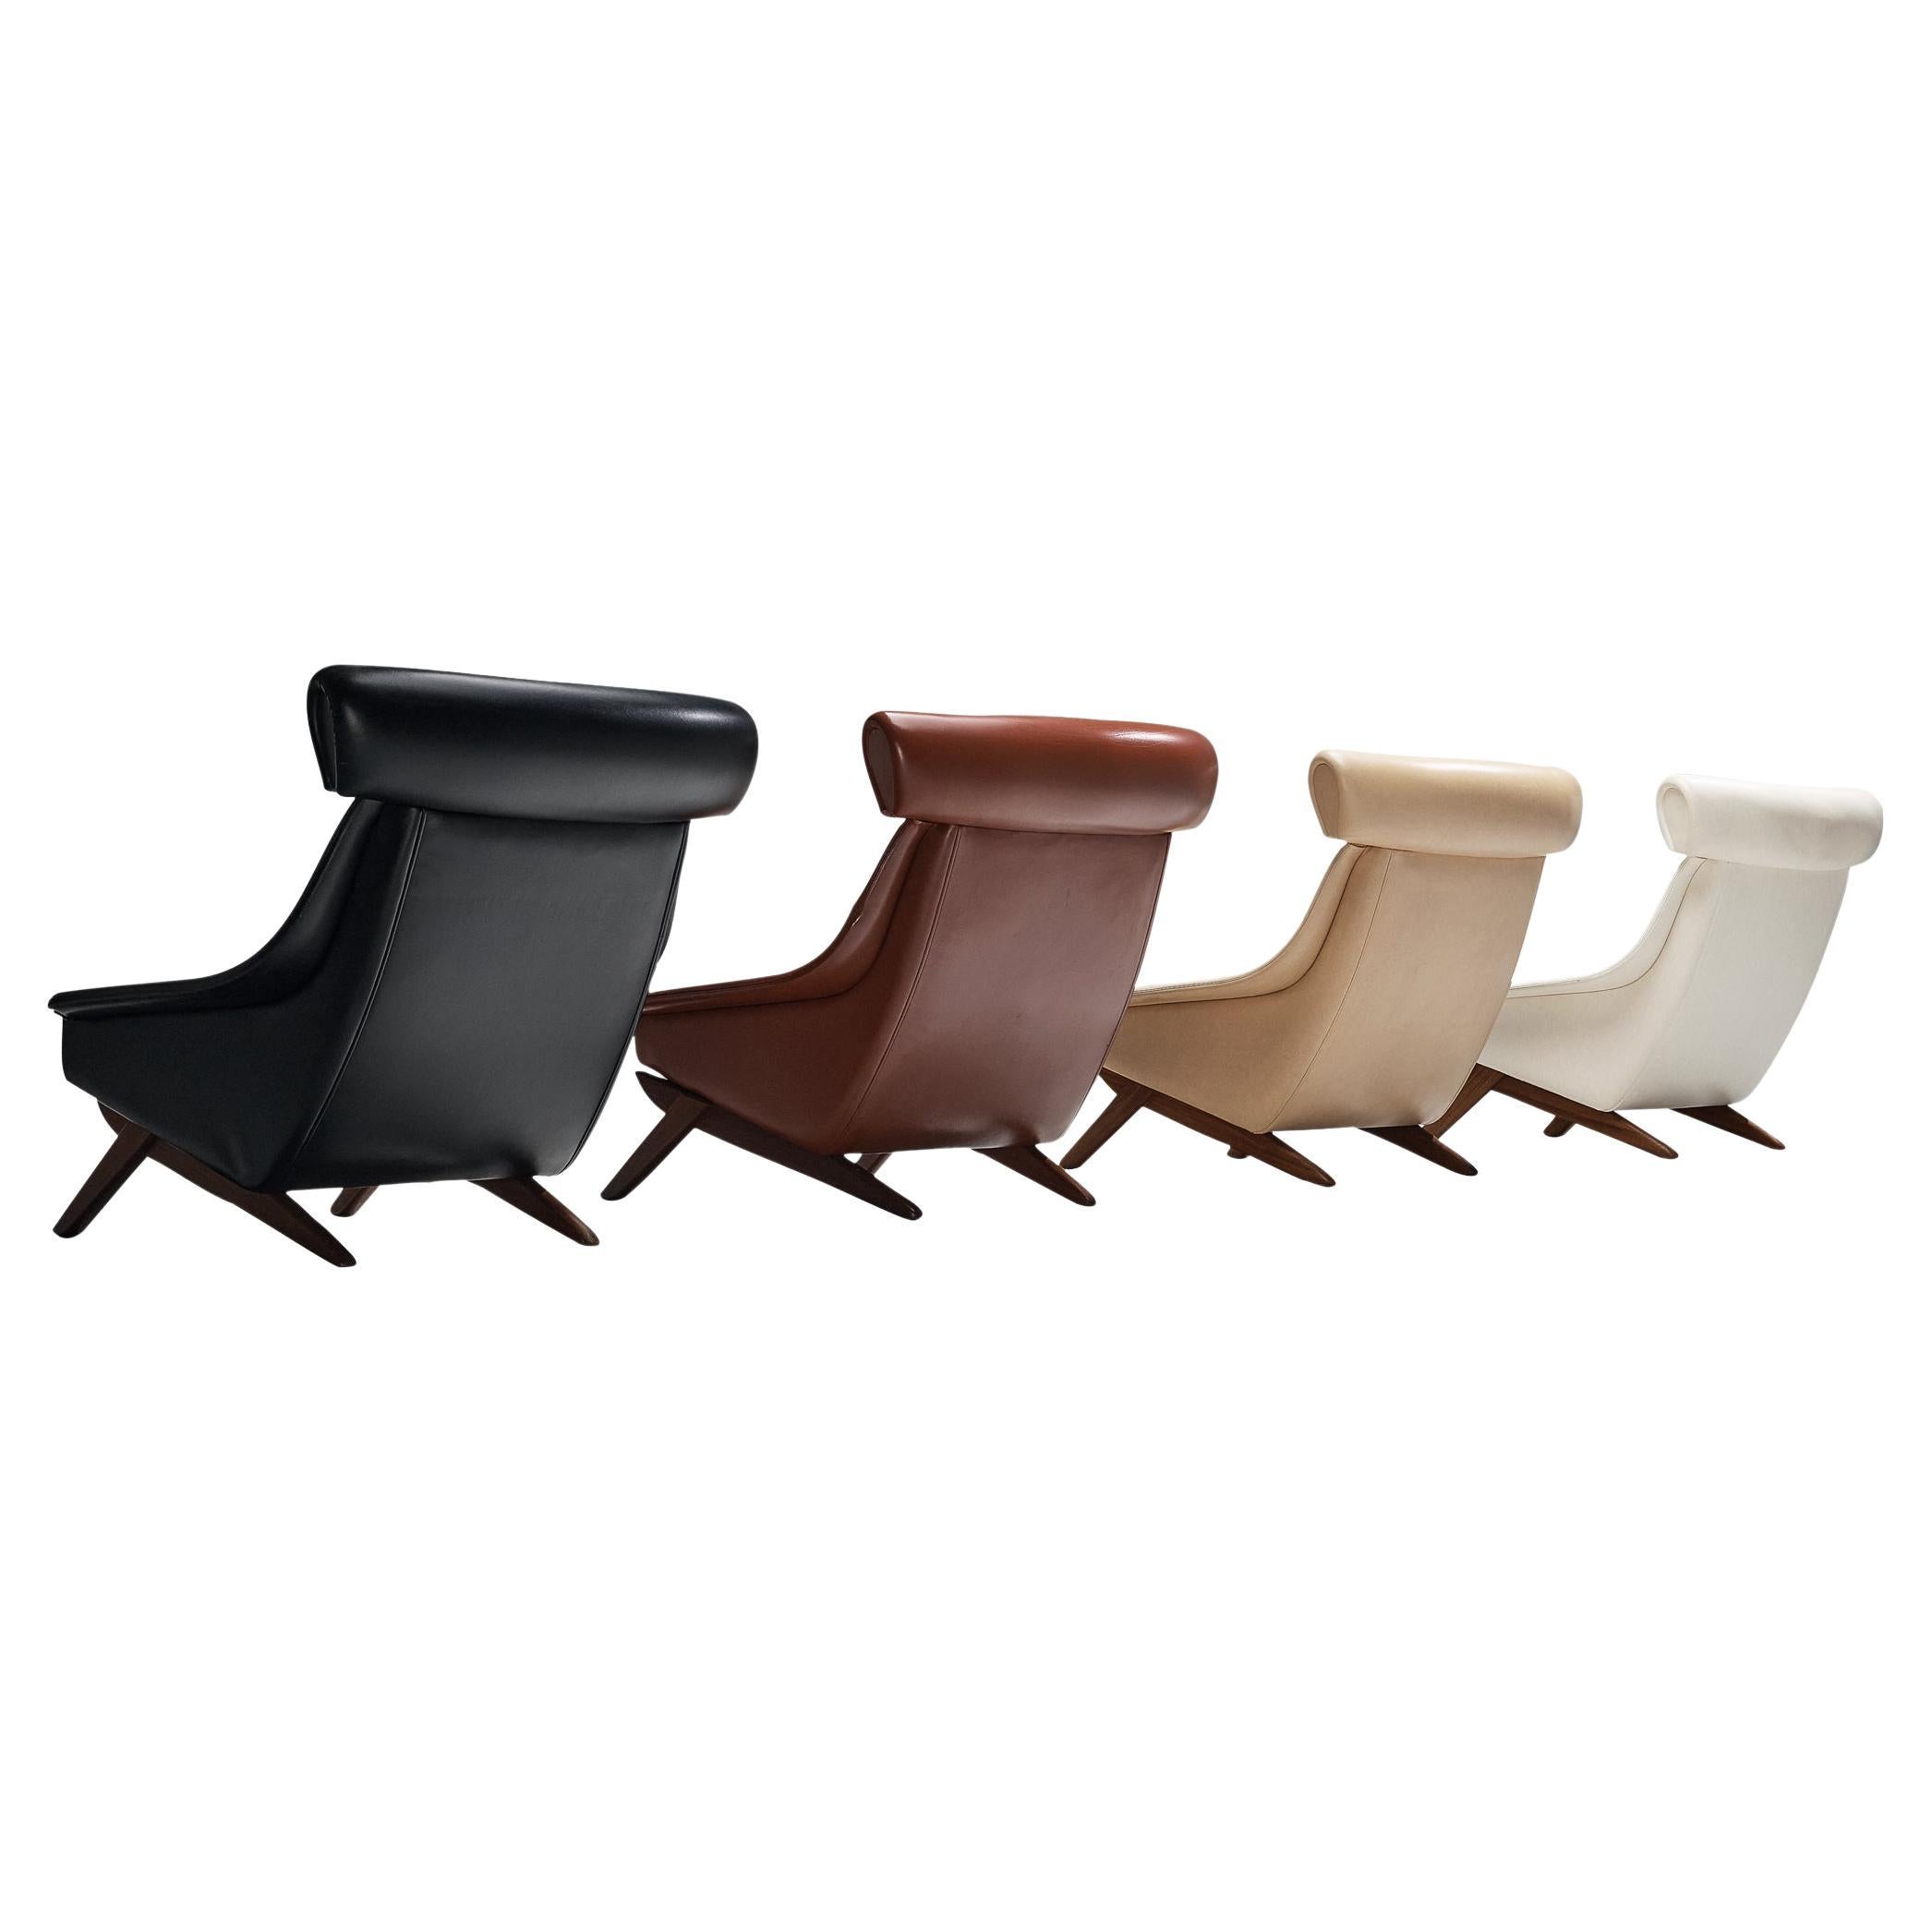 Illum Wikkelsø 'Ox' Easy Chairs in Leatherette and Teak